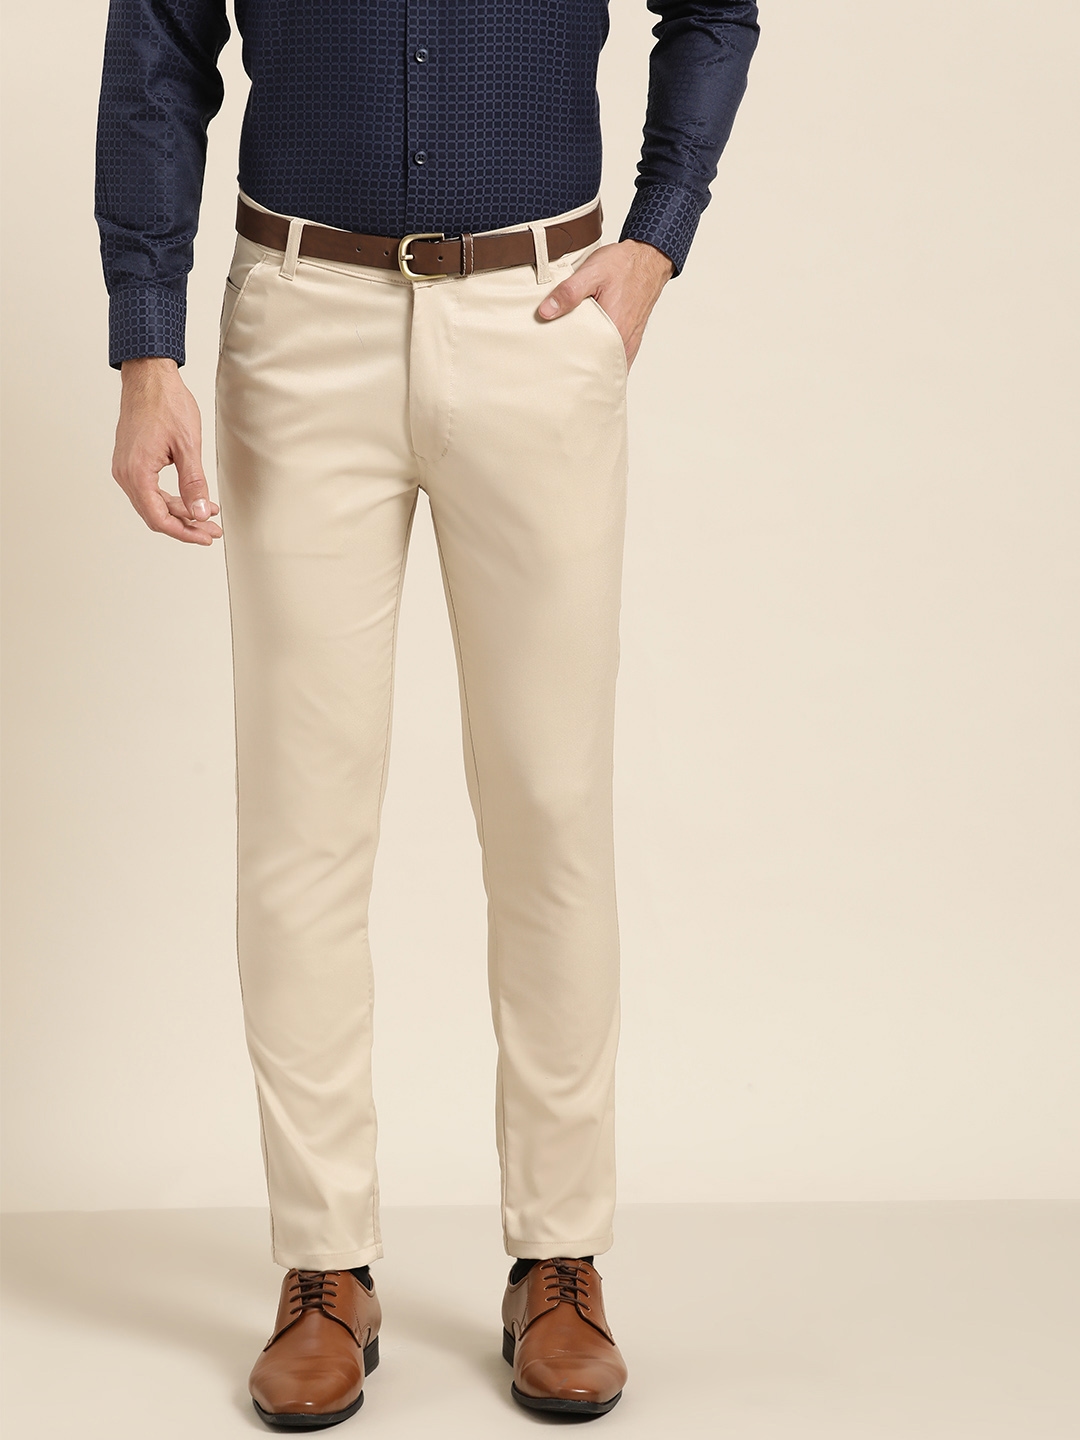 Share more than 216 cream trouser combination